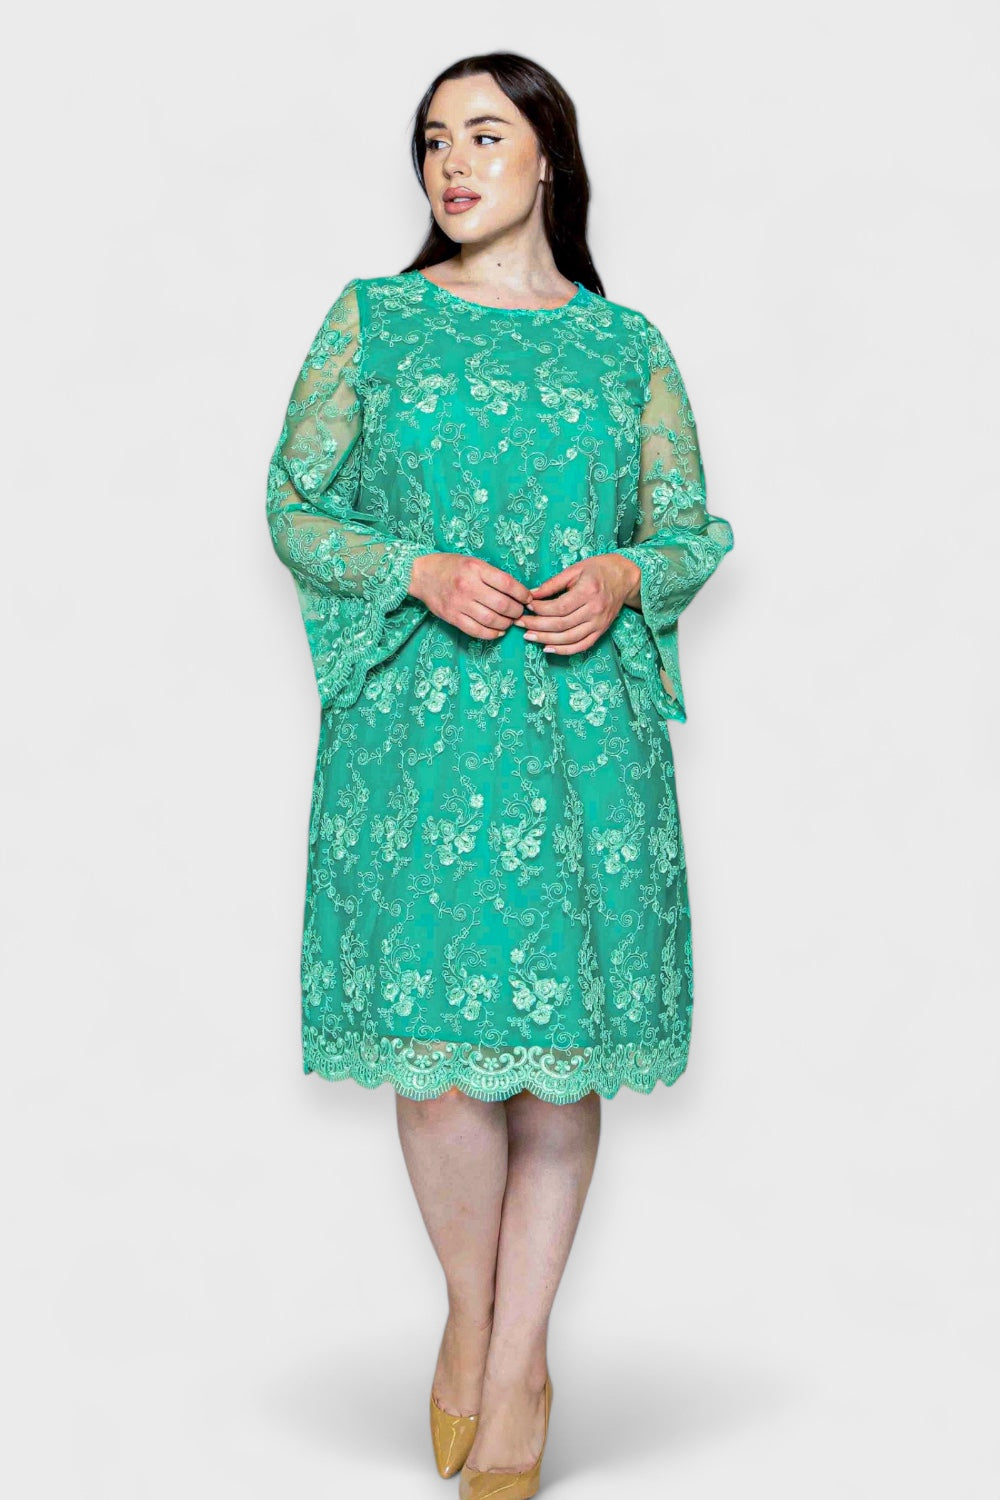 Plus-Size Turquoise Lace Bell Sleeve Formal Dress by Sara Sabella Italian Women's Clothing